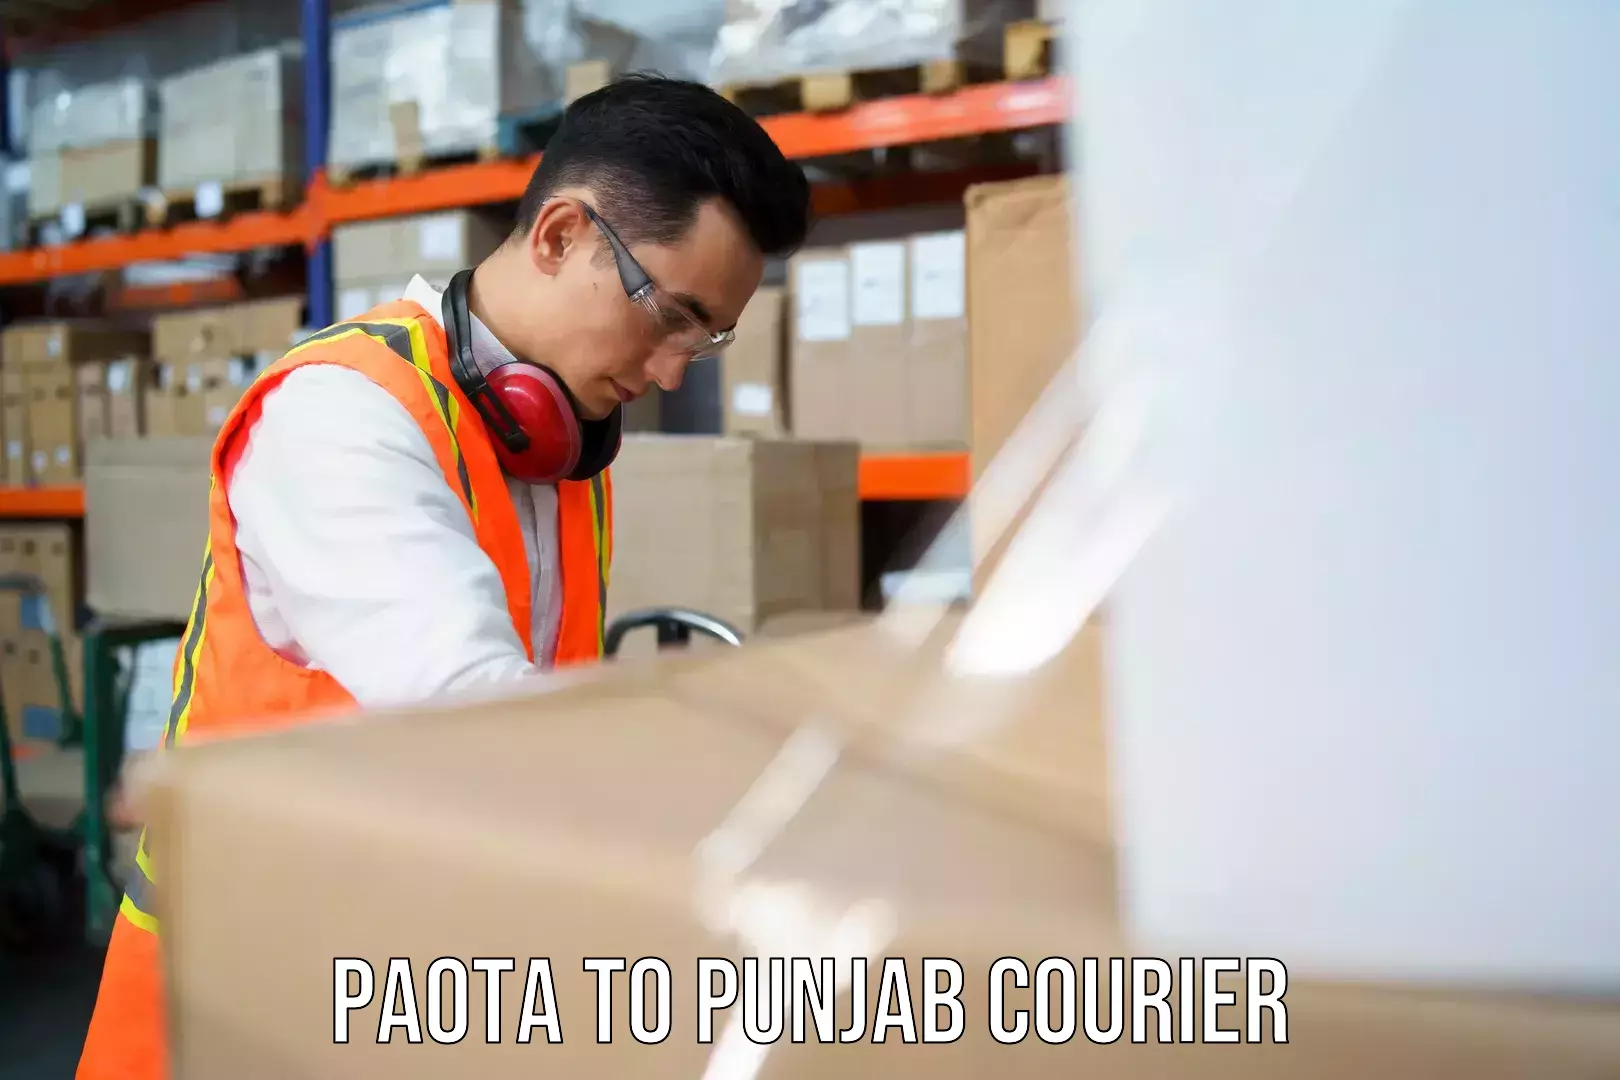 Multi-national courier services Paota to Punjab